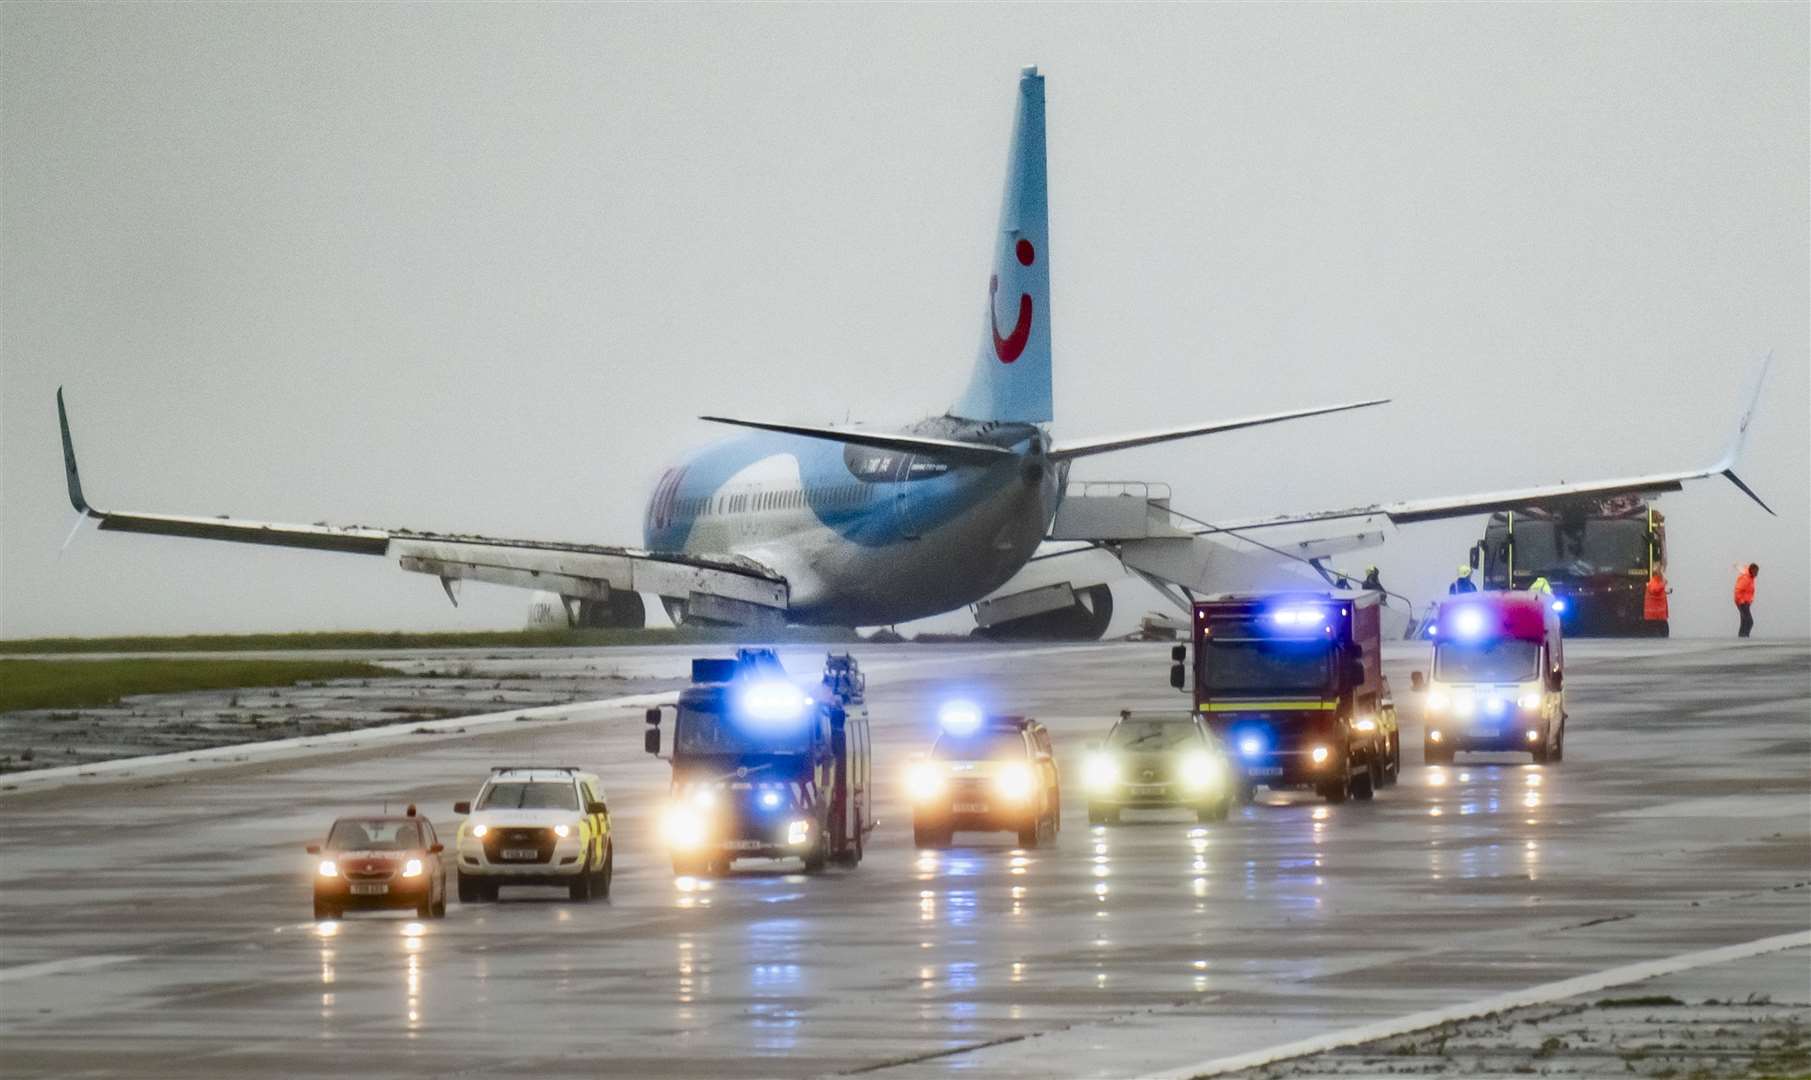 Emergency services at the scene after a passenger plane came off the runway at Leeds Bradford Airport while landing in windy conditions during Storm Babet (Danny Lawson/PA)